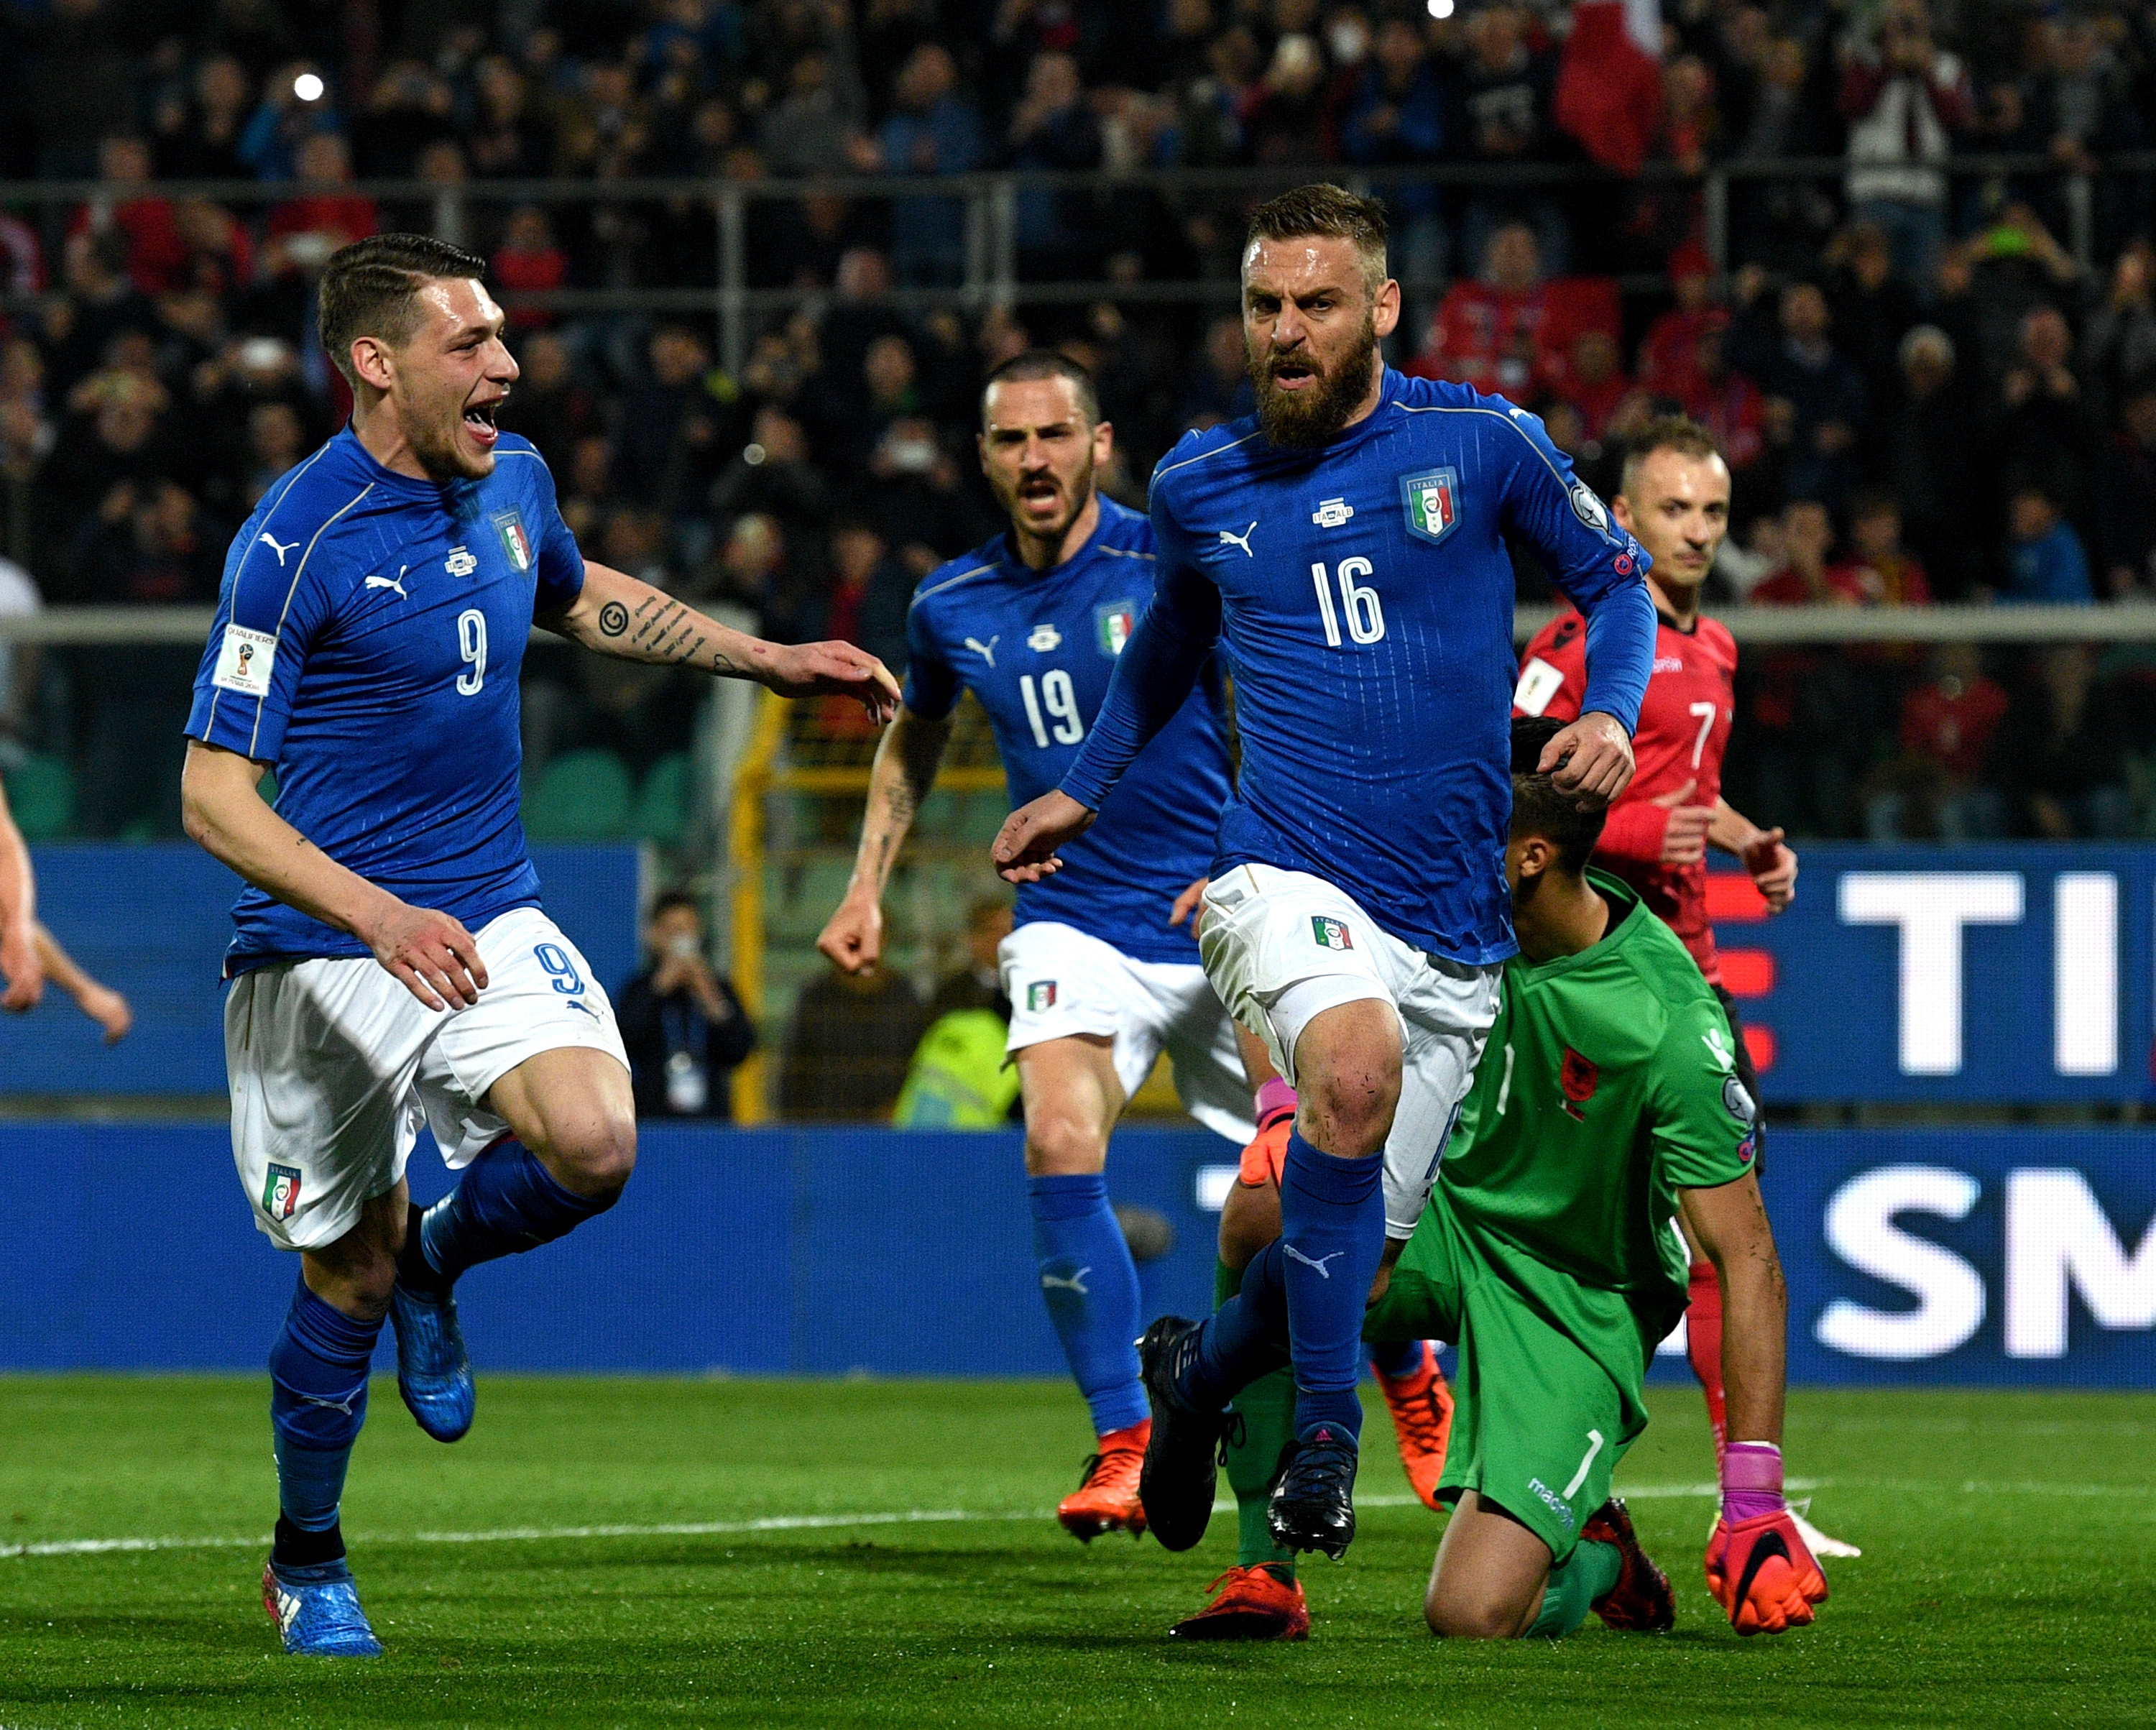 PALERMO, ITALY - MARCH 24:  Daniele De Rossi of Italy #16 celebrates after scoring the opening goal during the FIFA 2018 World Cup Qualifier between Italy and Albania at Stadio Renzo Barbera on March 24, 2017 in Palermo, .  (Photo by Claudio Villa/Getty Images)